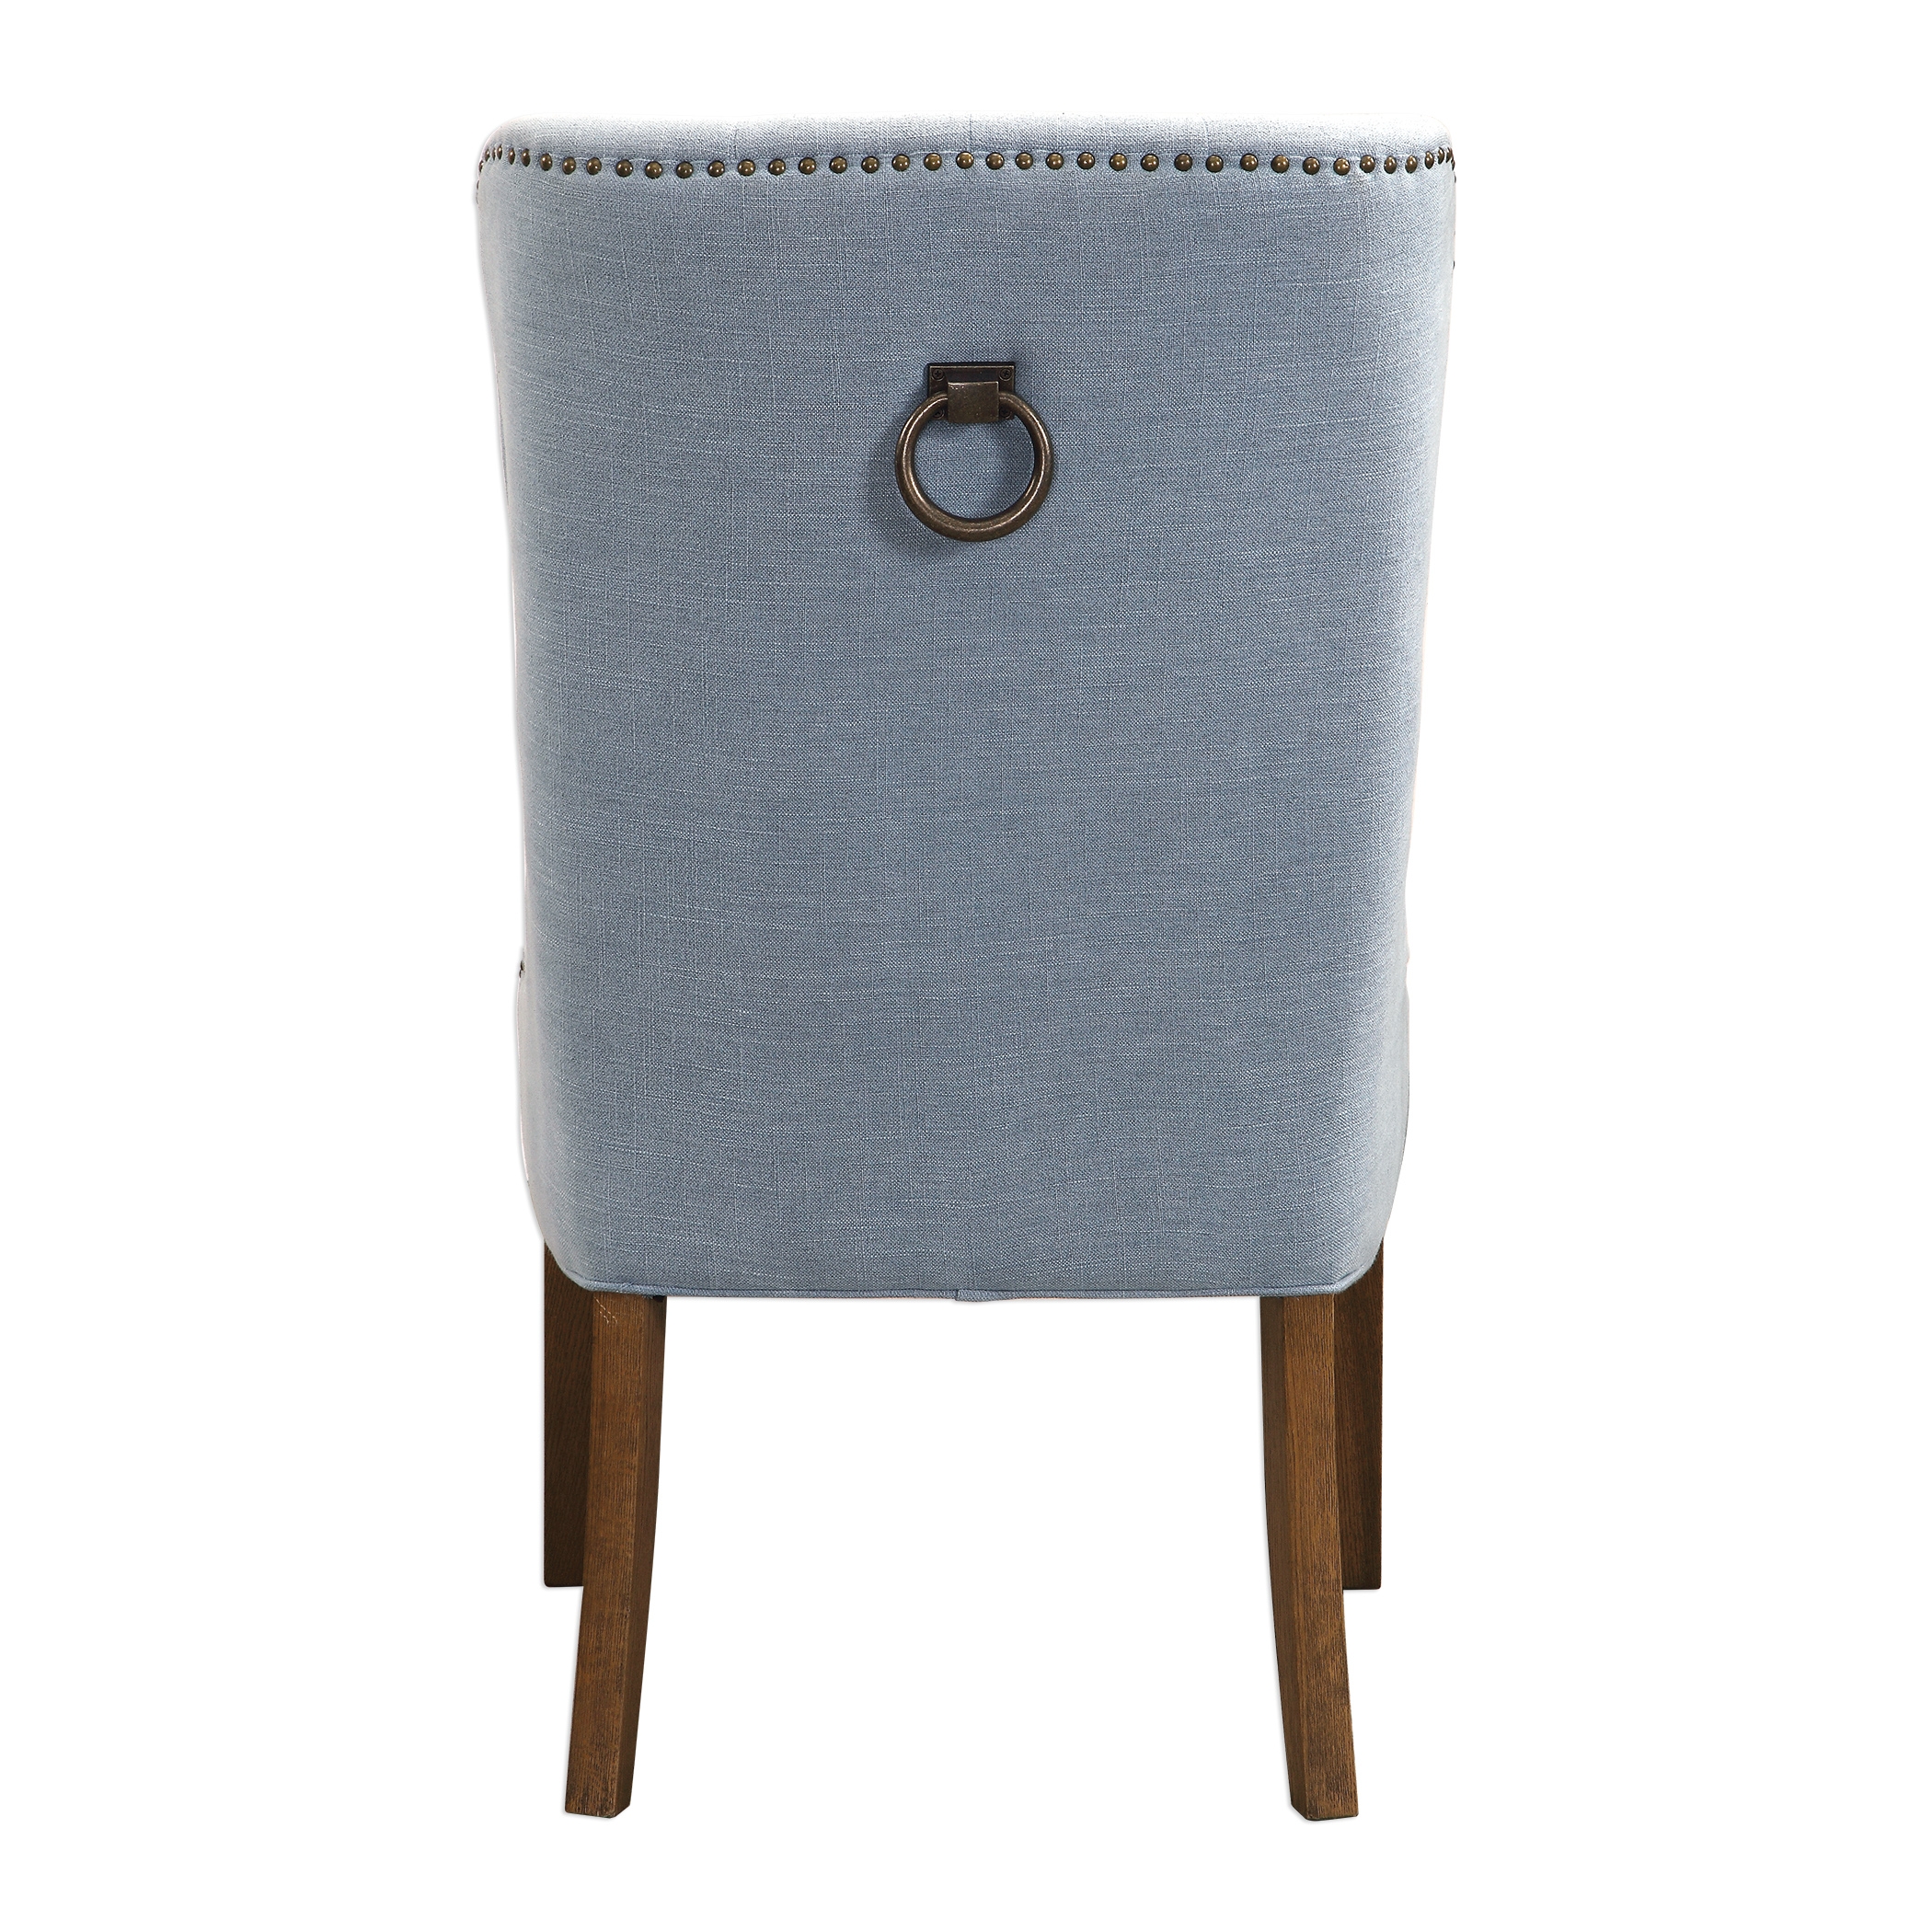 Rioni Tufted Wing Chair - Image 3